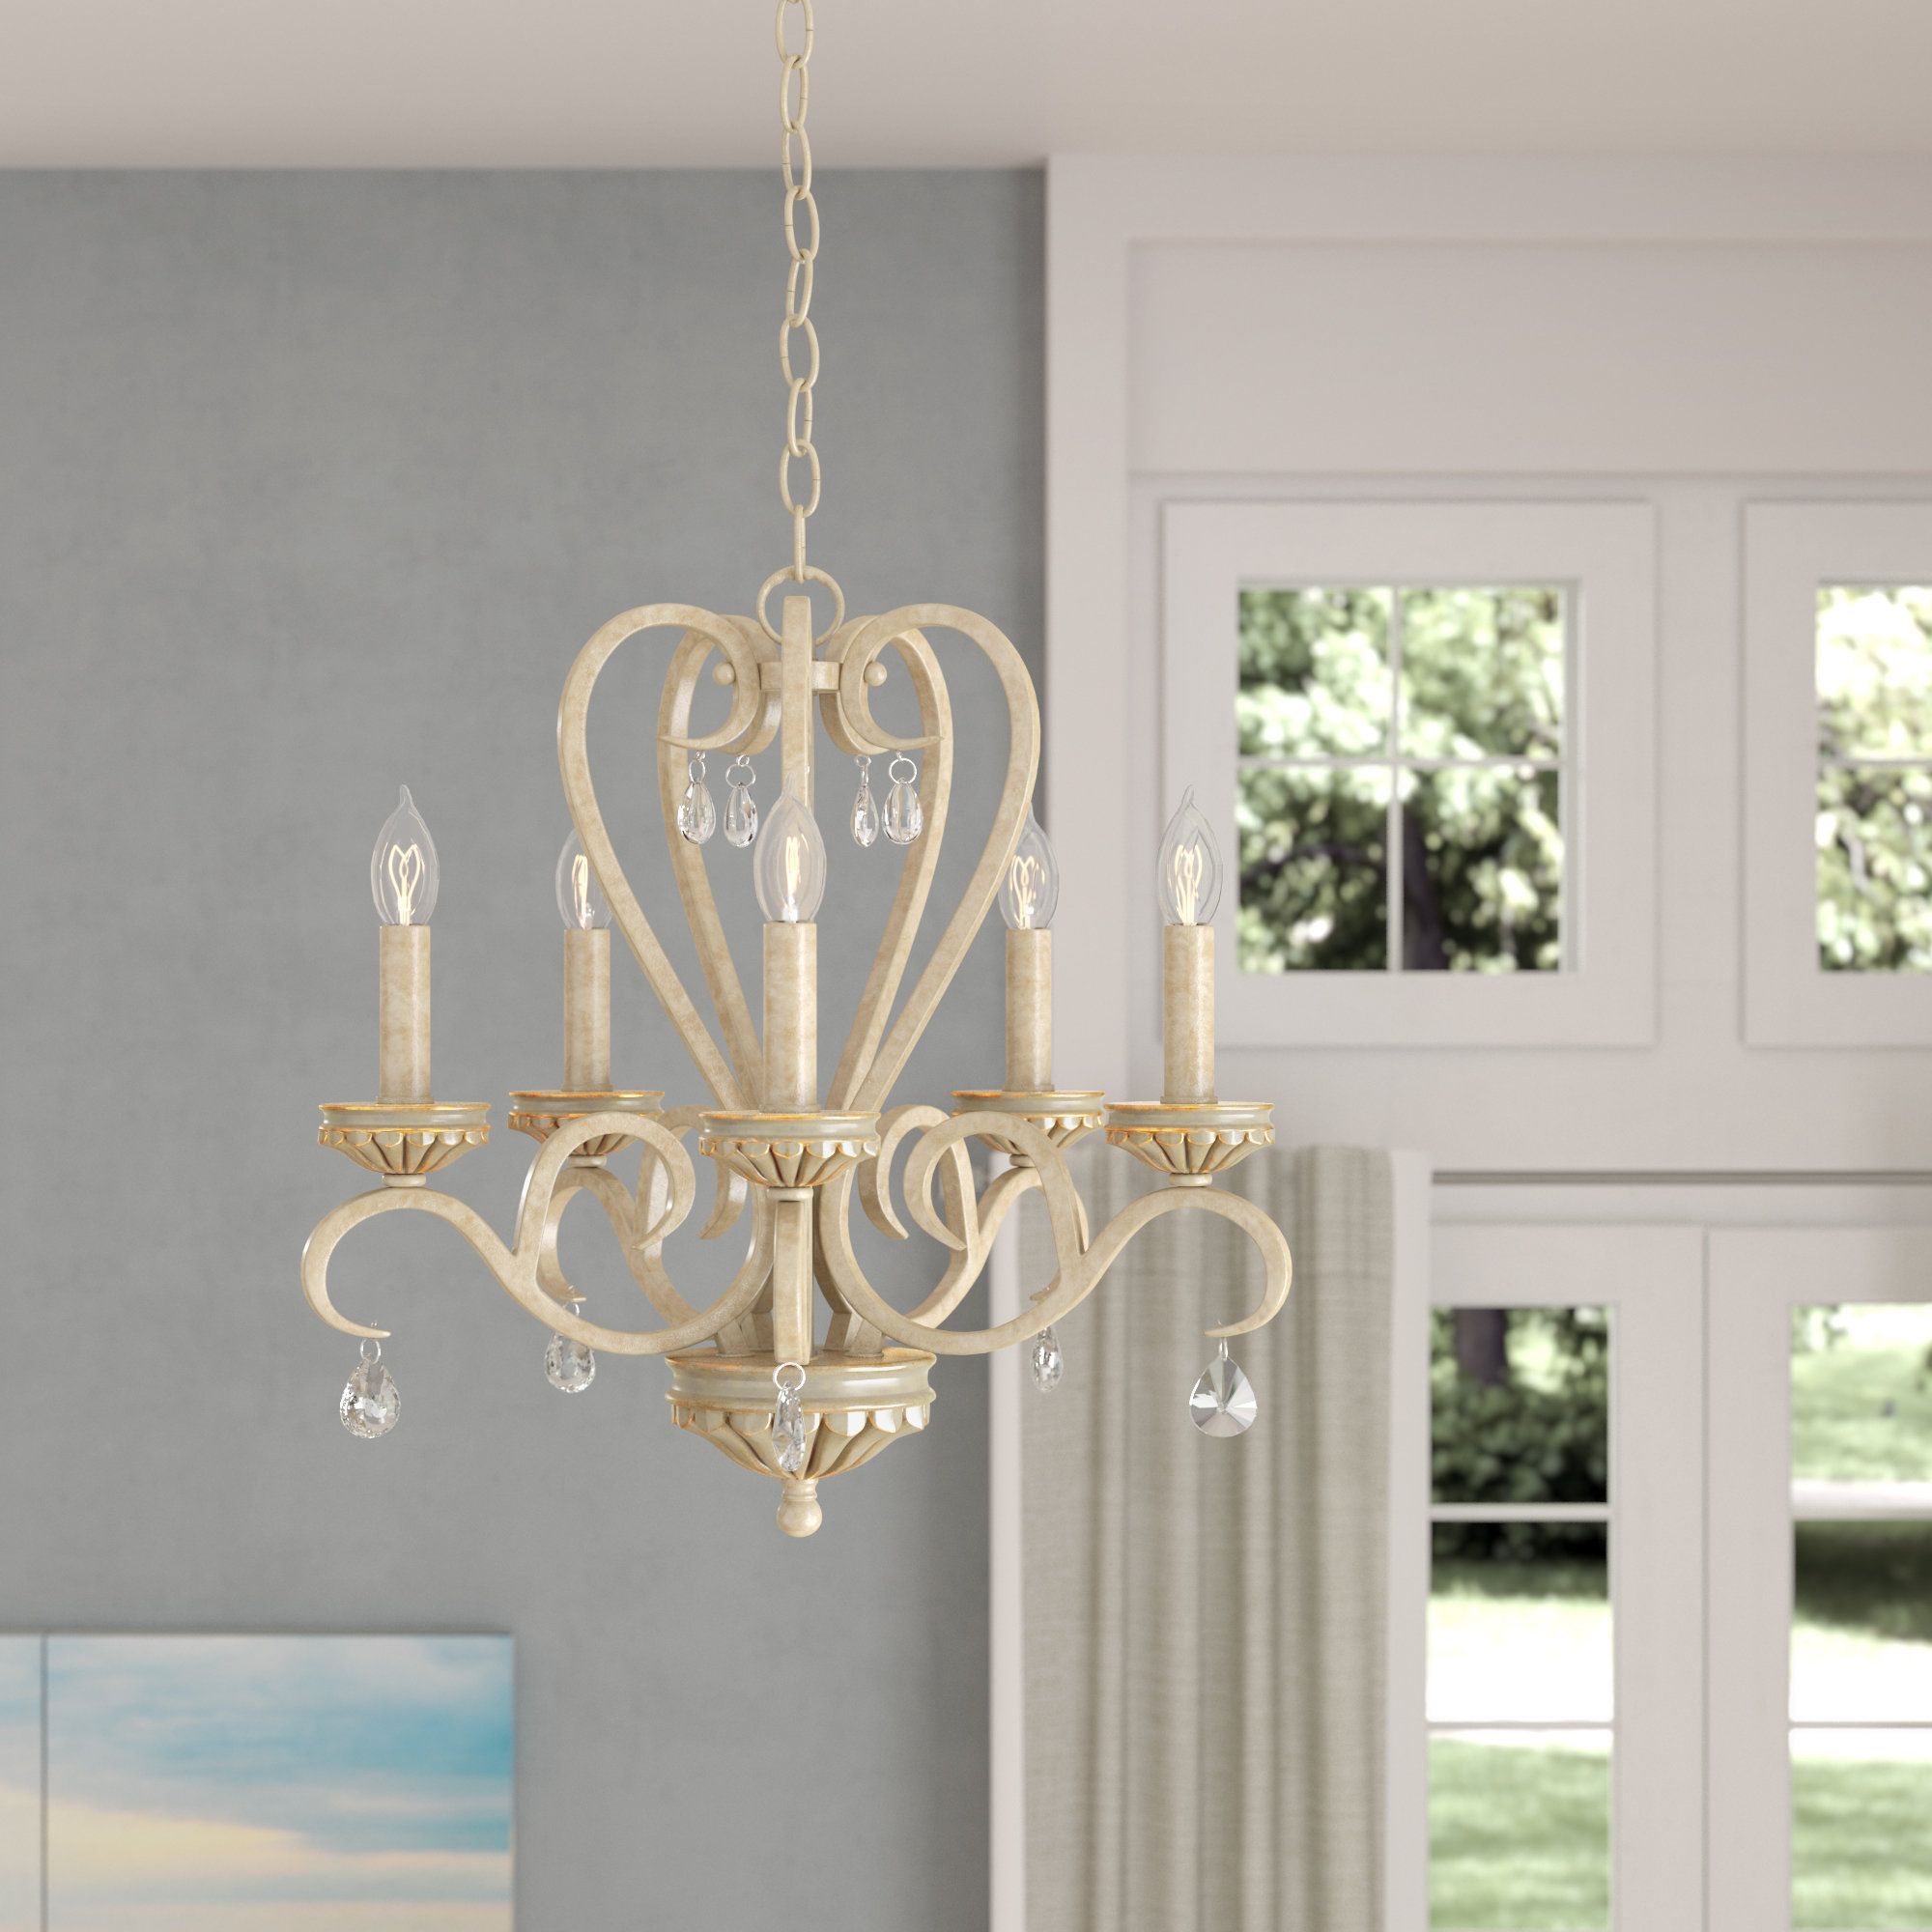 Widely Used Blanchette 5 Light Candle Style Chandeliers Intended For Khaled 5 Light Candle Style Chandelier (View 10 of 25)